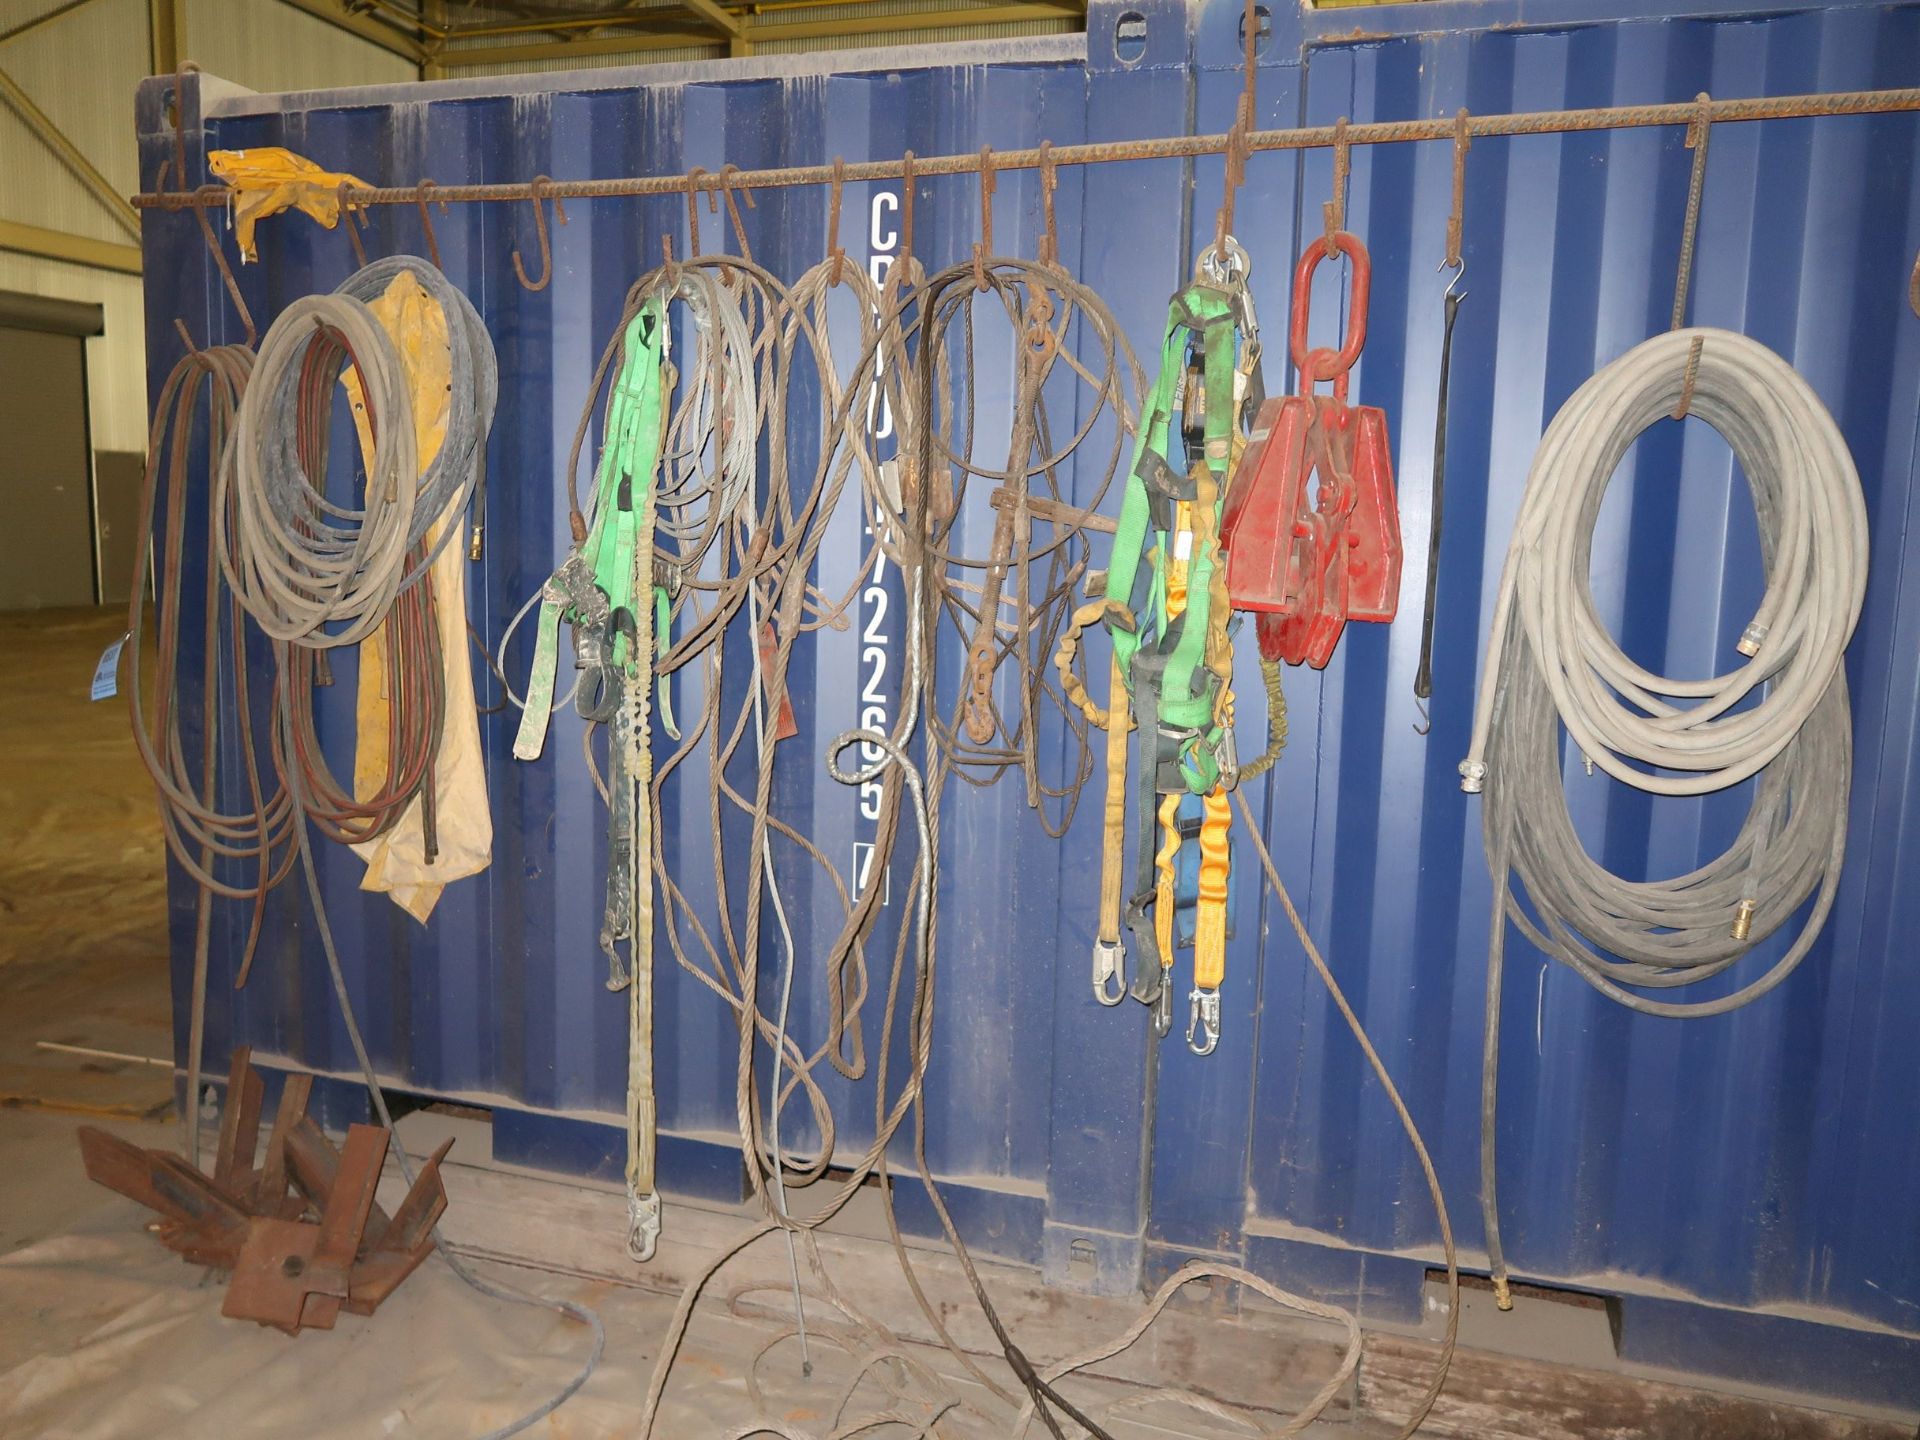 CONTENTS OF REAR OF CONTAINER INCLUDING HOSES, LIFTING STRAPS AND CABLES, SAFETY HARNESSES - Image 3 of 3